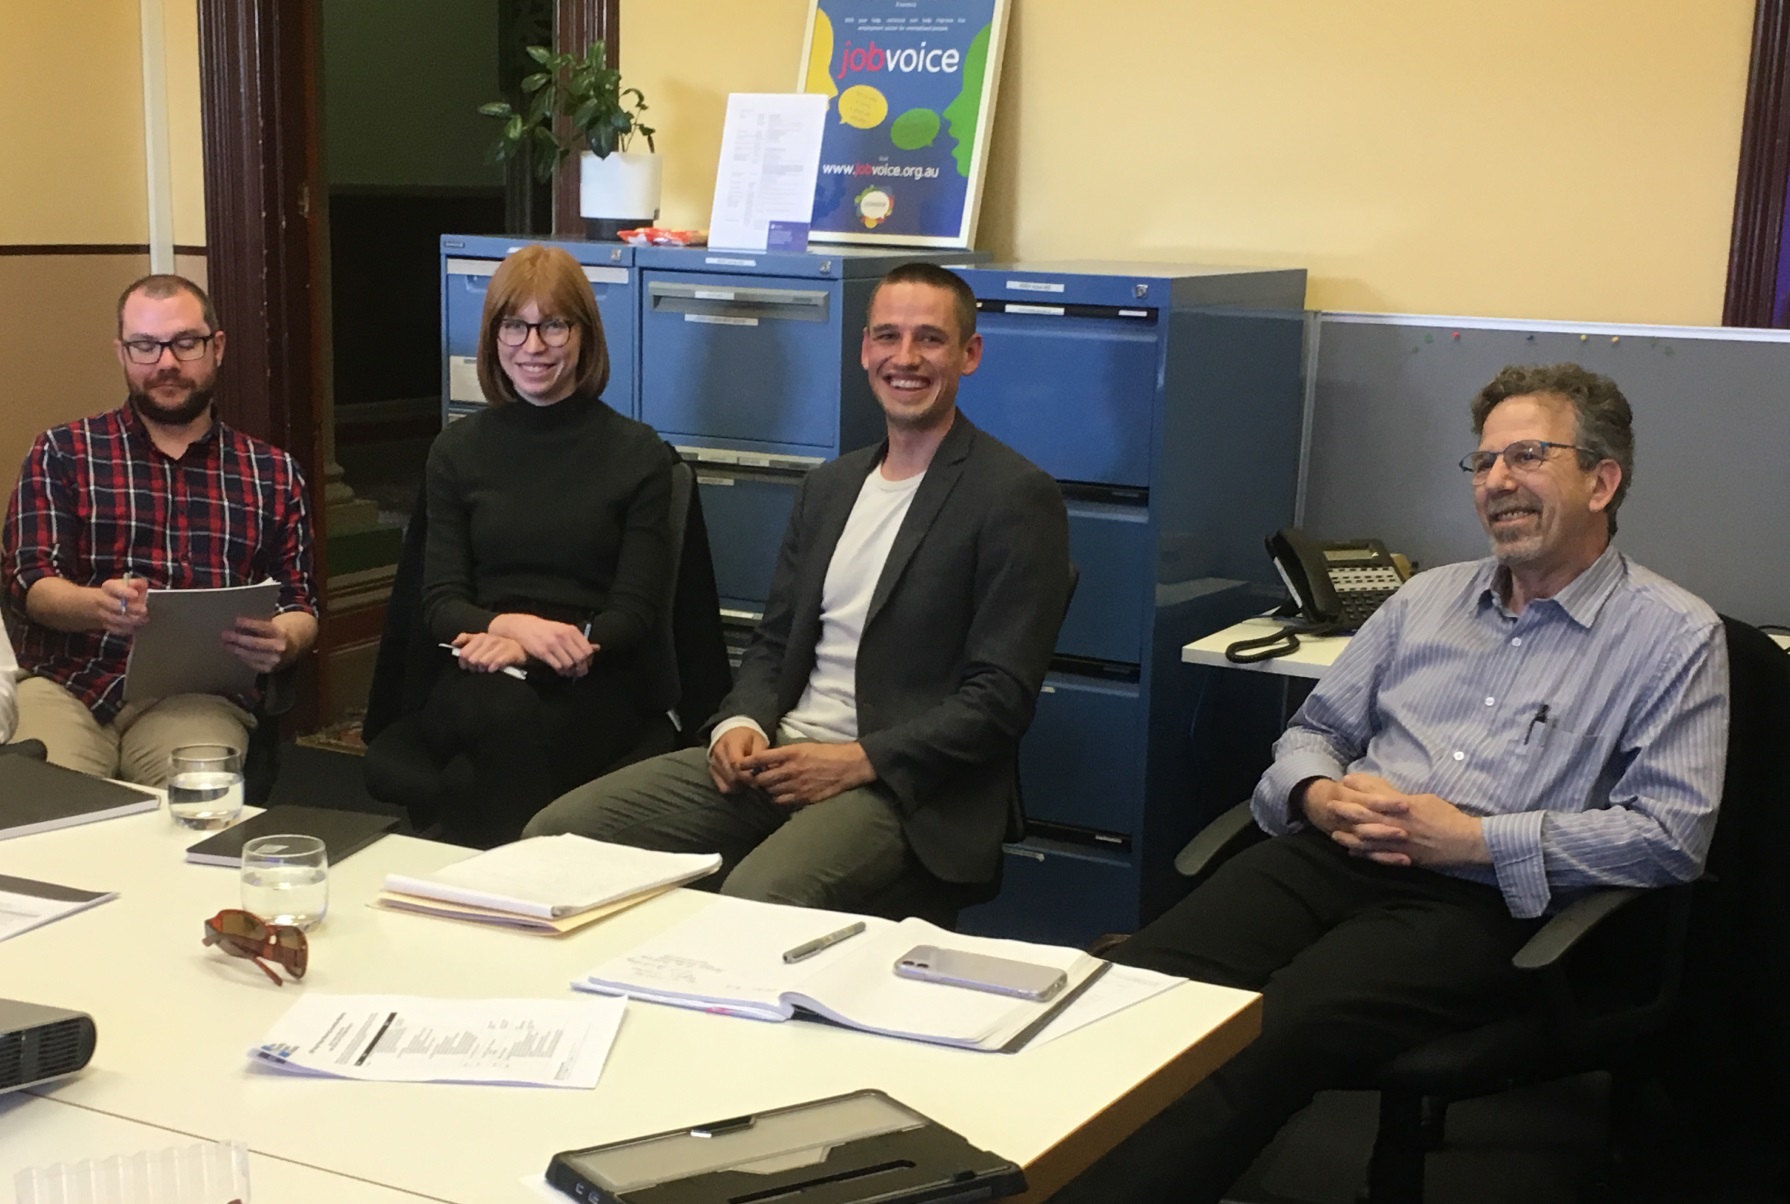 The DSP Help Steering Committee in action. From L-R: Dermott Williams (DSP Help community lawyer), Hannah Mitchell (Paper Giant), Bryn Overend (SSRV), and Len Jaffit (Victoria Legal Aid)